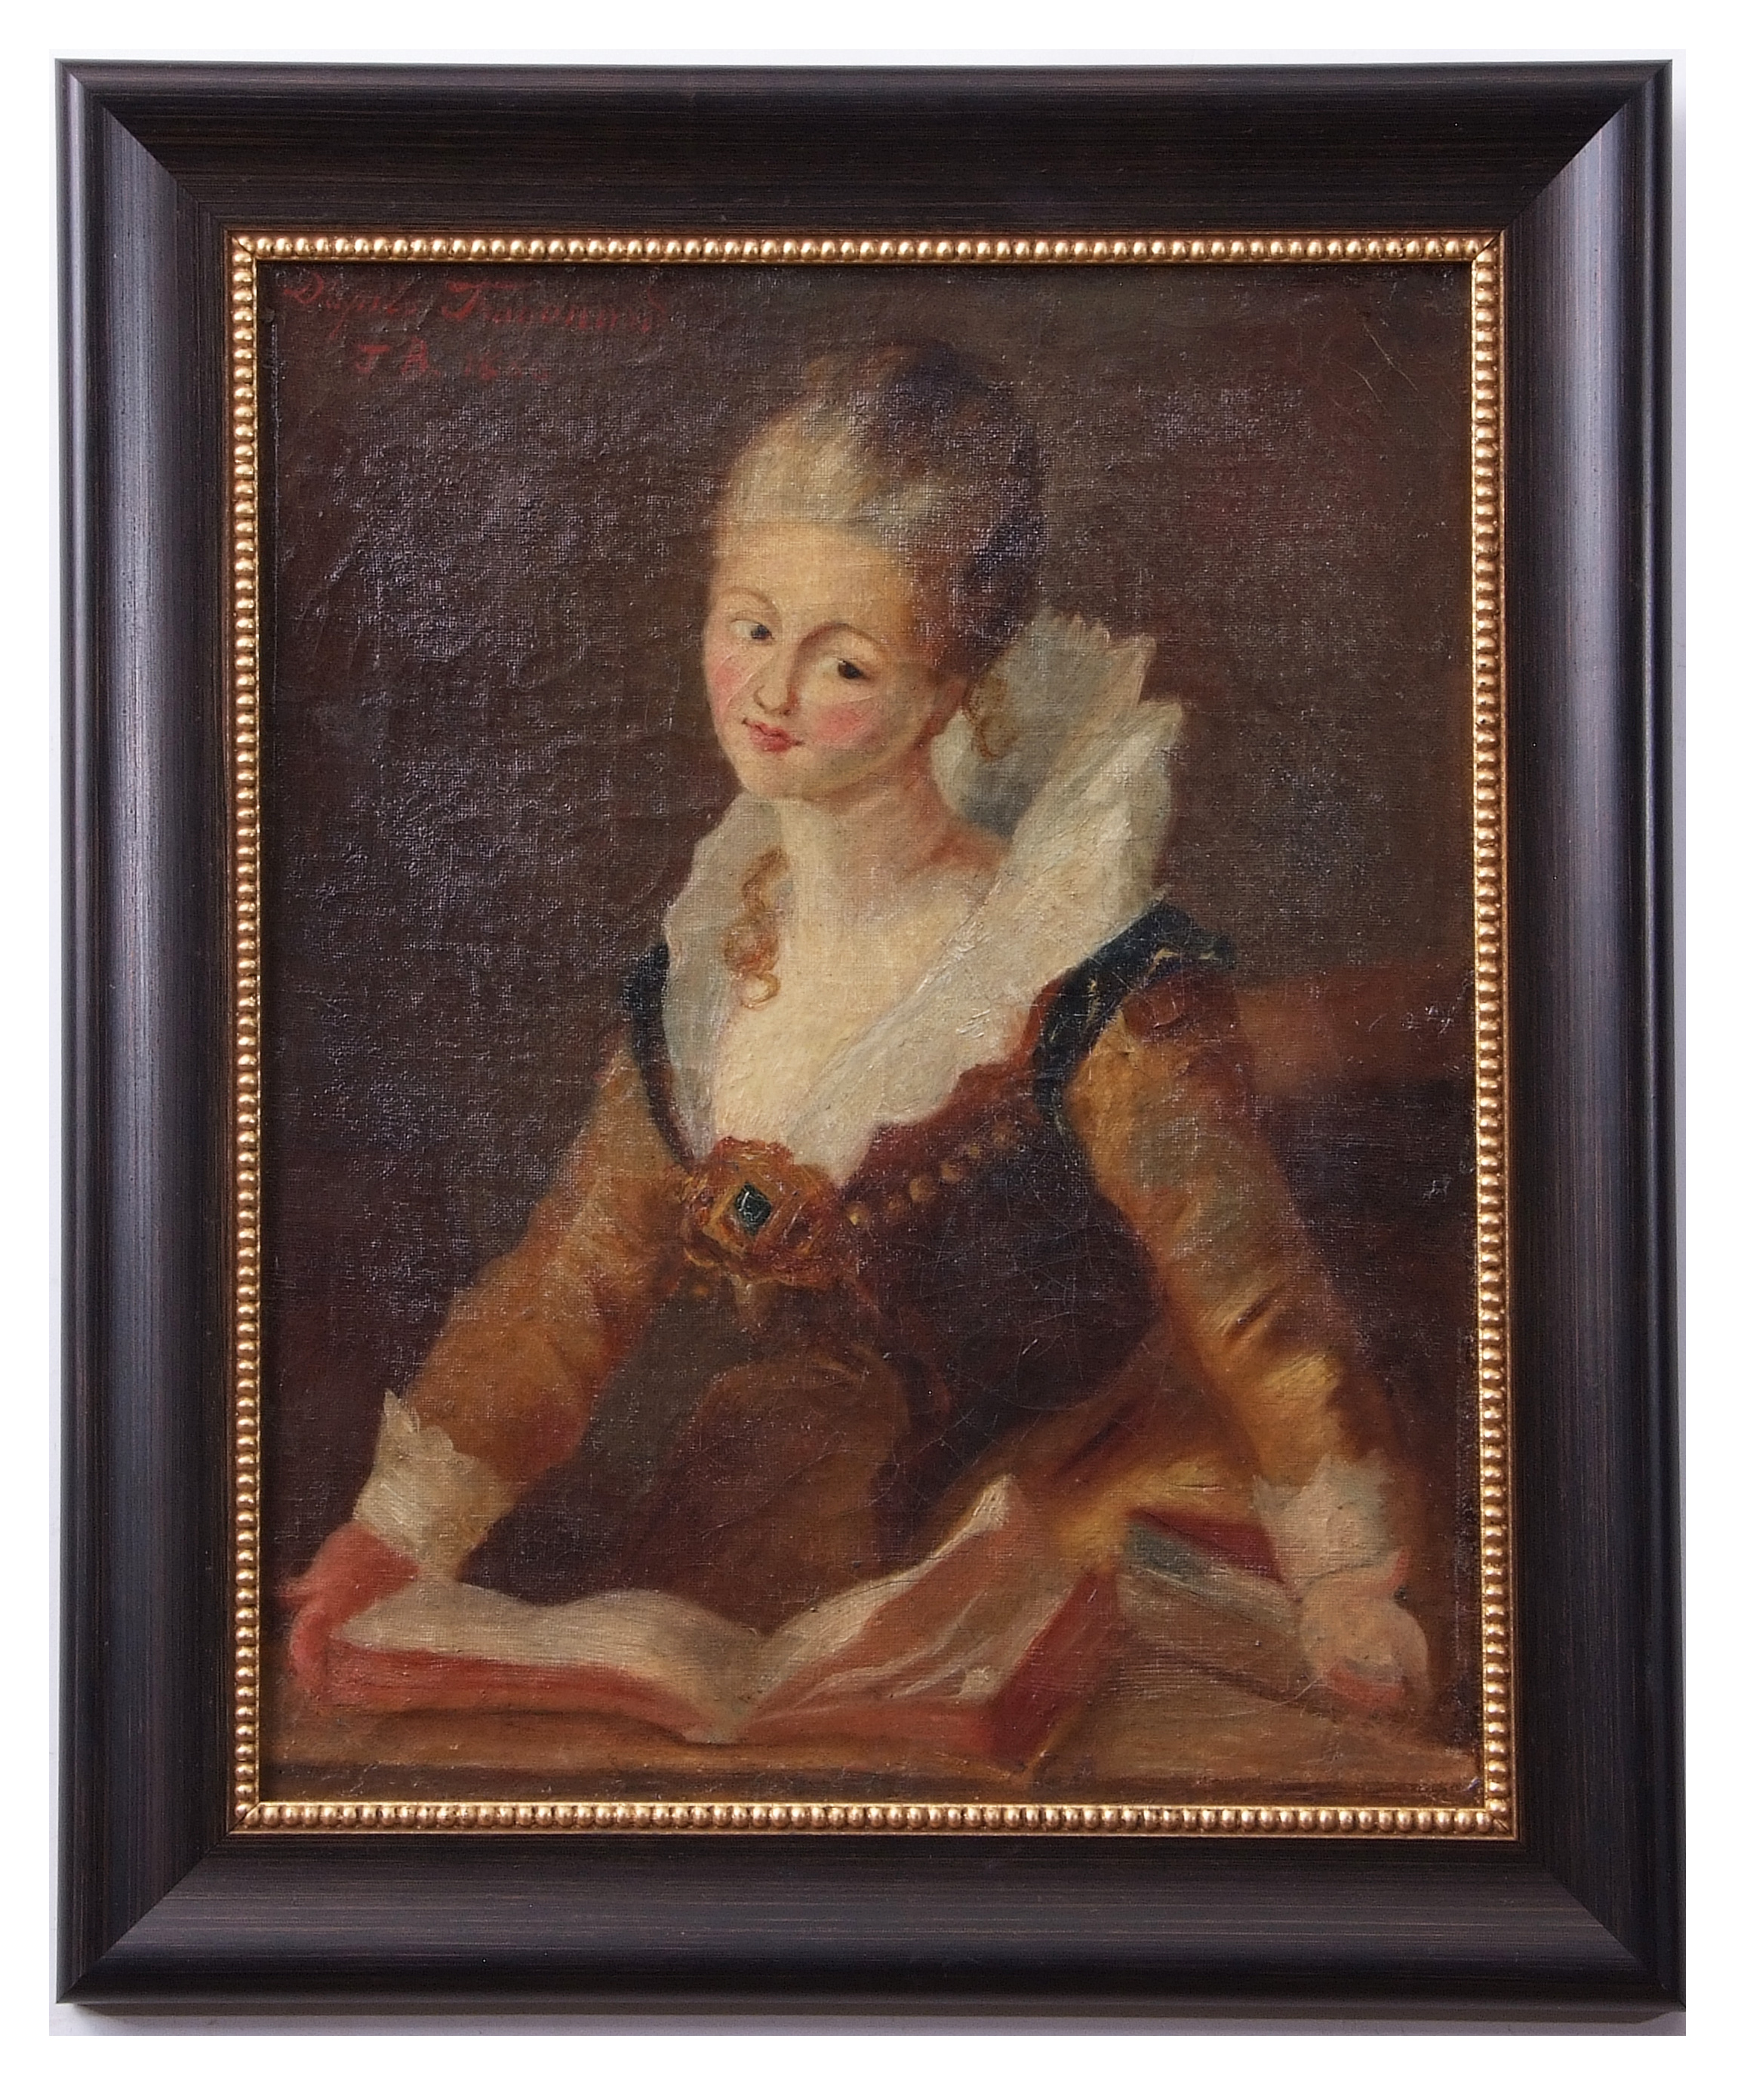 JB (late 19th century), Portrait of a lady reading a book (after Fragonard) oil on canvas laid to